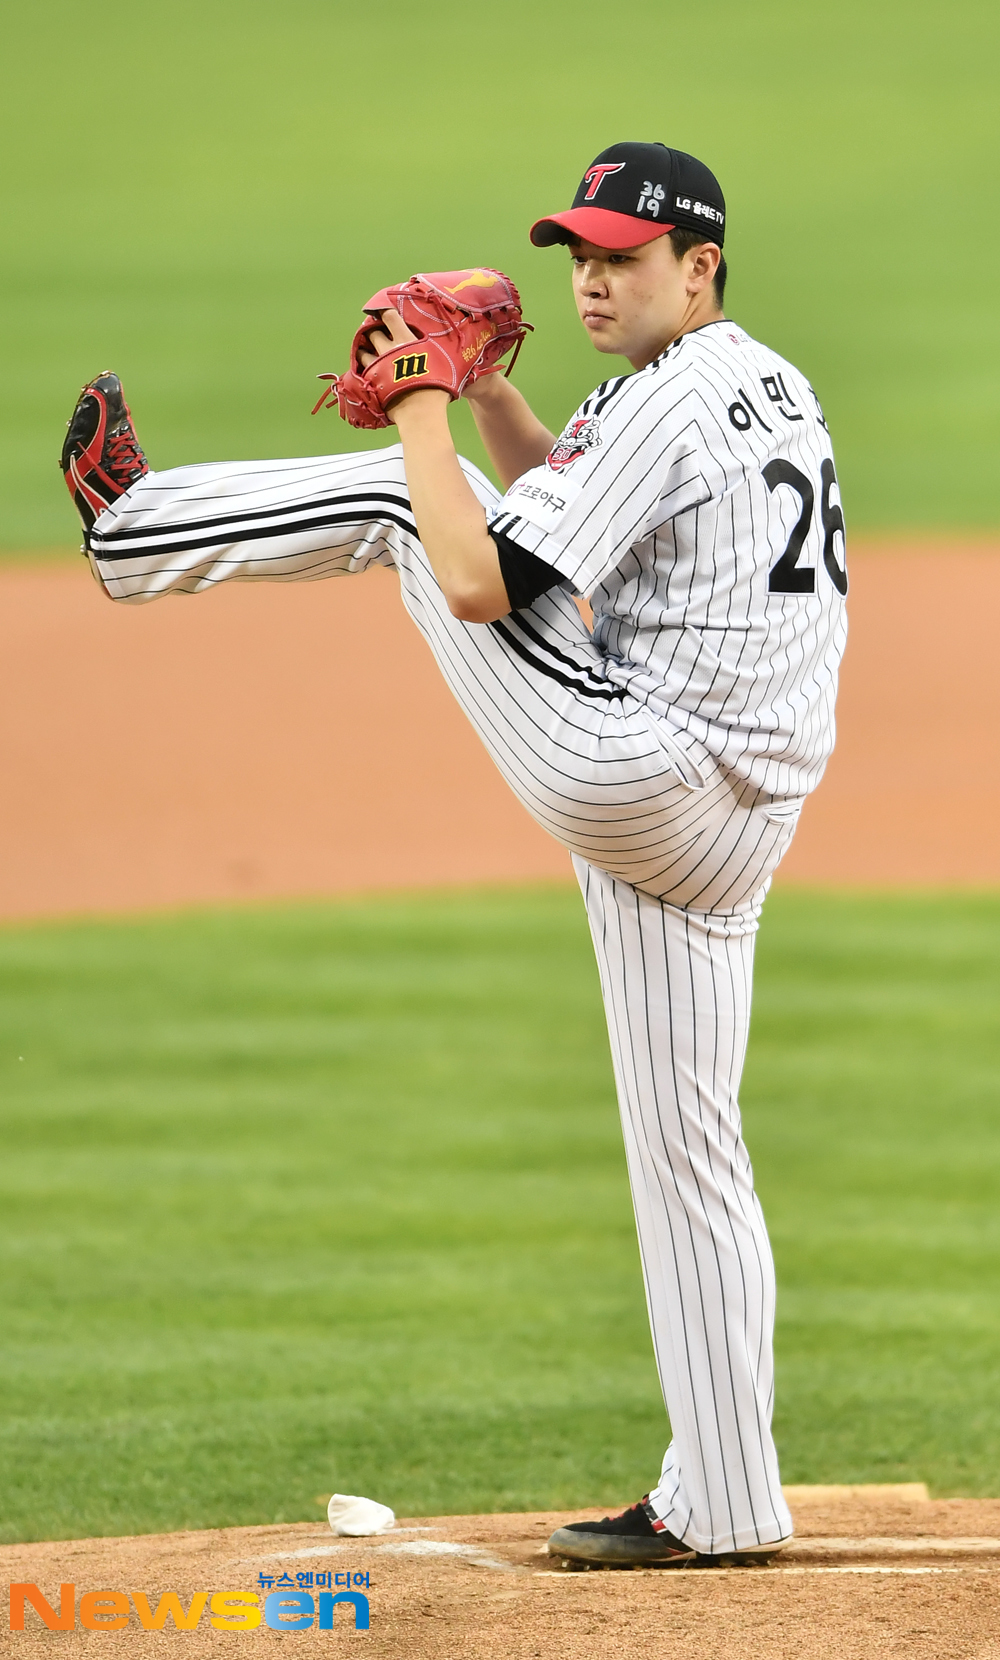 Lee Min-ho was a big hit.LG Twins Lee Min-ho pitched at the Samsung Lions Lions and Kyonggi in the 2020 Shinhan Bank SOL KBO League held at Jamsil-dong Stadium in Seoul on June 2.Lee Min-ho, who started at Kyonggi on the day, scored two runs in seven innings.Lee Min-ho pitched the most debut innings and also recorded his first quality start.Lee Min-ho allowed Hit to first-time leadoff hitter Kim Sang-su, who walked Park Chan-do to get a two-run double to Tyler Saladino.Saladino, who raced to third base, was caught by the defense and Lee Min-ho struck out Lee Won-Seok and Hak-ju Lee to finish the inning.In the second inning, Kim Dong Yub was hit by a fly ball, Lee Sung-Gyu was grounded, and Kang Min-ho was treated as a fly ball.In the third inning, Kim Hun-Gon was treated as a flying ball and allowed Hit to Kim Sang-su.Lee Min-ho, who struck out Park Chan-do, was also hit by a double by Saladino, who was on the verge of second and third bases with two outs, but finished the inning by striking out Lee Won-seok.In the fourth inning, he struck out Hak-ju Lee and allowed Kim Dong Yub to play.Lee Min-ho, who handled Lee Sung-Gyu, finished the innings by catching Kim Dong Yub with checks.In the fifth inning, Kang Min-ho was grounded, Kim Hun-Gon was floated, and Kim Sang-su was grounded.In the sixth inning, he gave up a walk to lead hitter Park Chan-do, but struck out Saladino and Lee Won-seok and blocked Hak-ju Lee with a grounder.Lee Min-ho also came to the Mound in the seventh inning and gave Hit to Kim Dong Yub, but struck out Lee Sung-Gyu and treated Kang Min-ho as a sickness.Ahn Hyung-joon / Pyo Myeong-jung